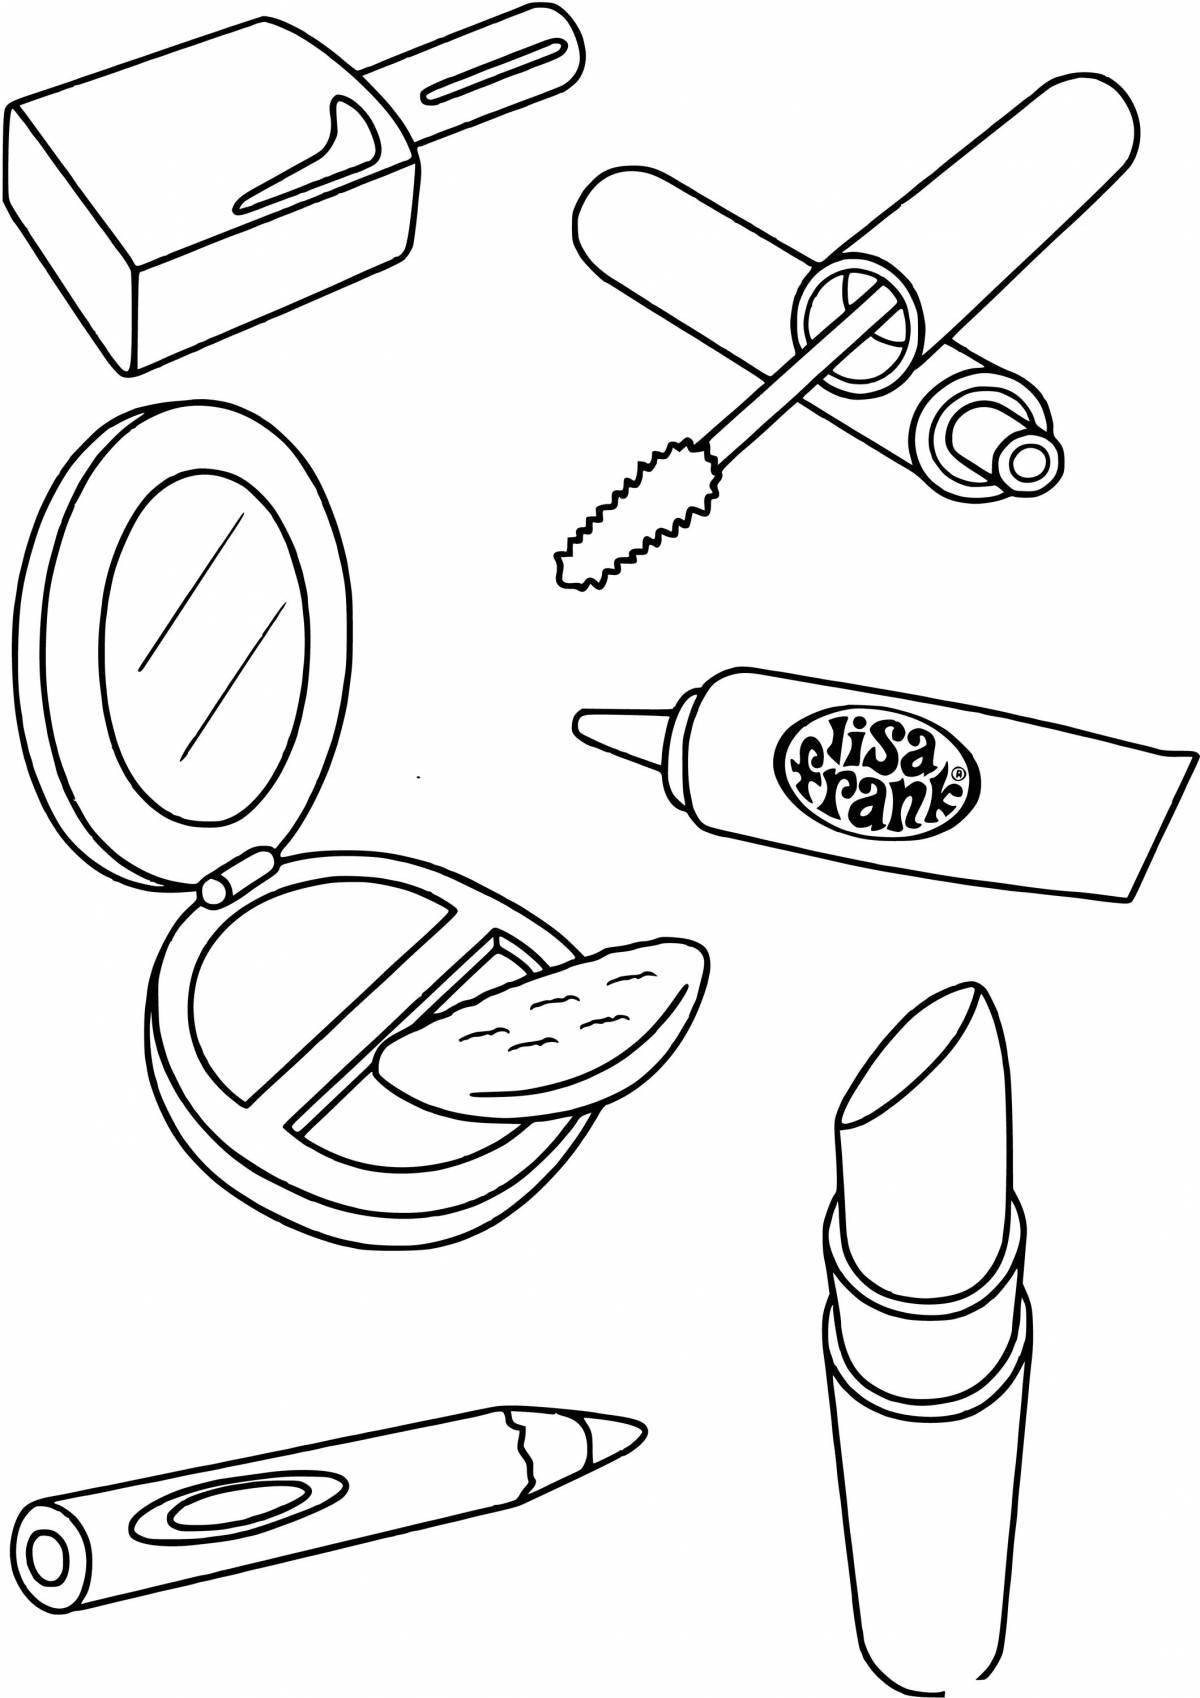 Awesome lipstick coloring page for kids